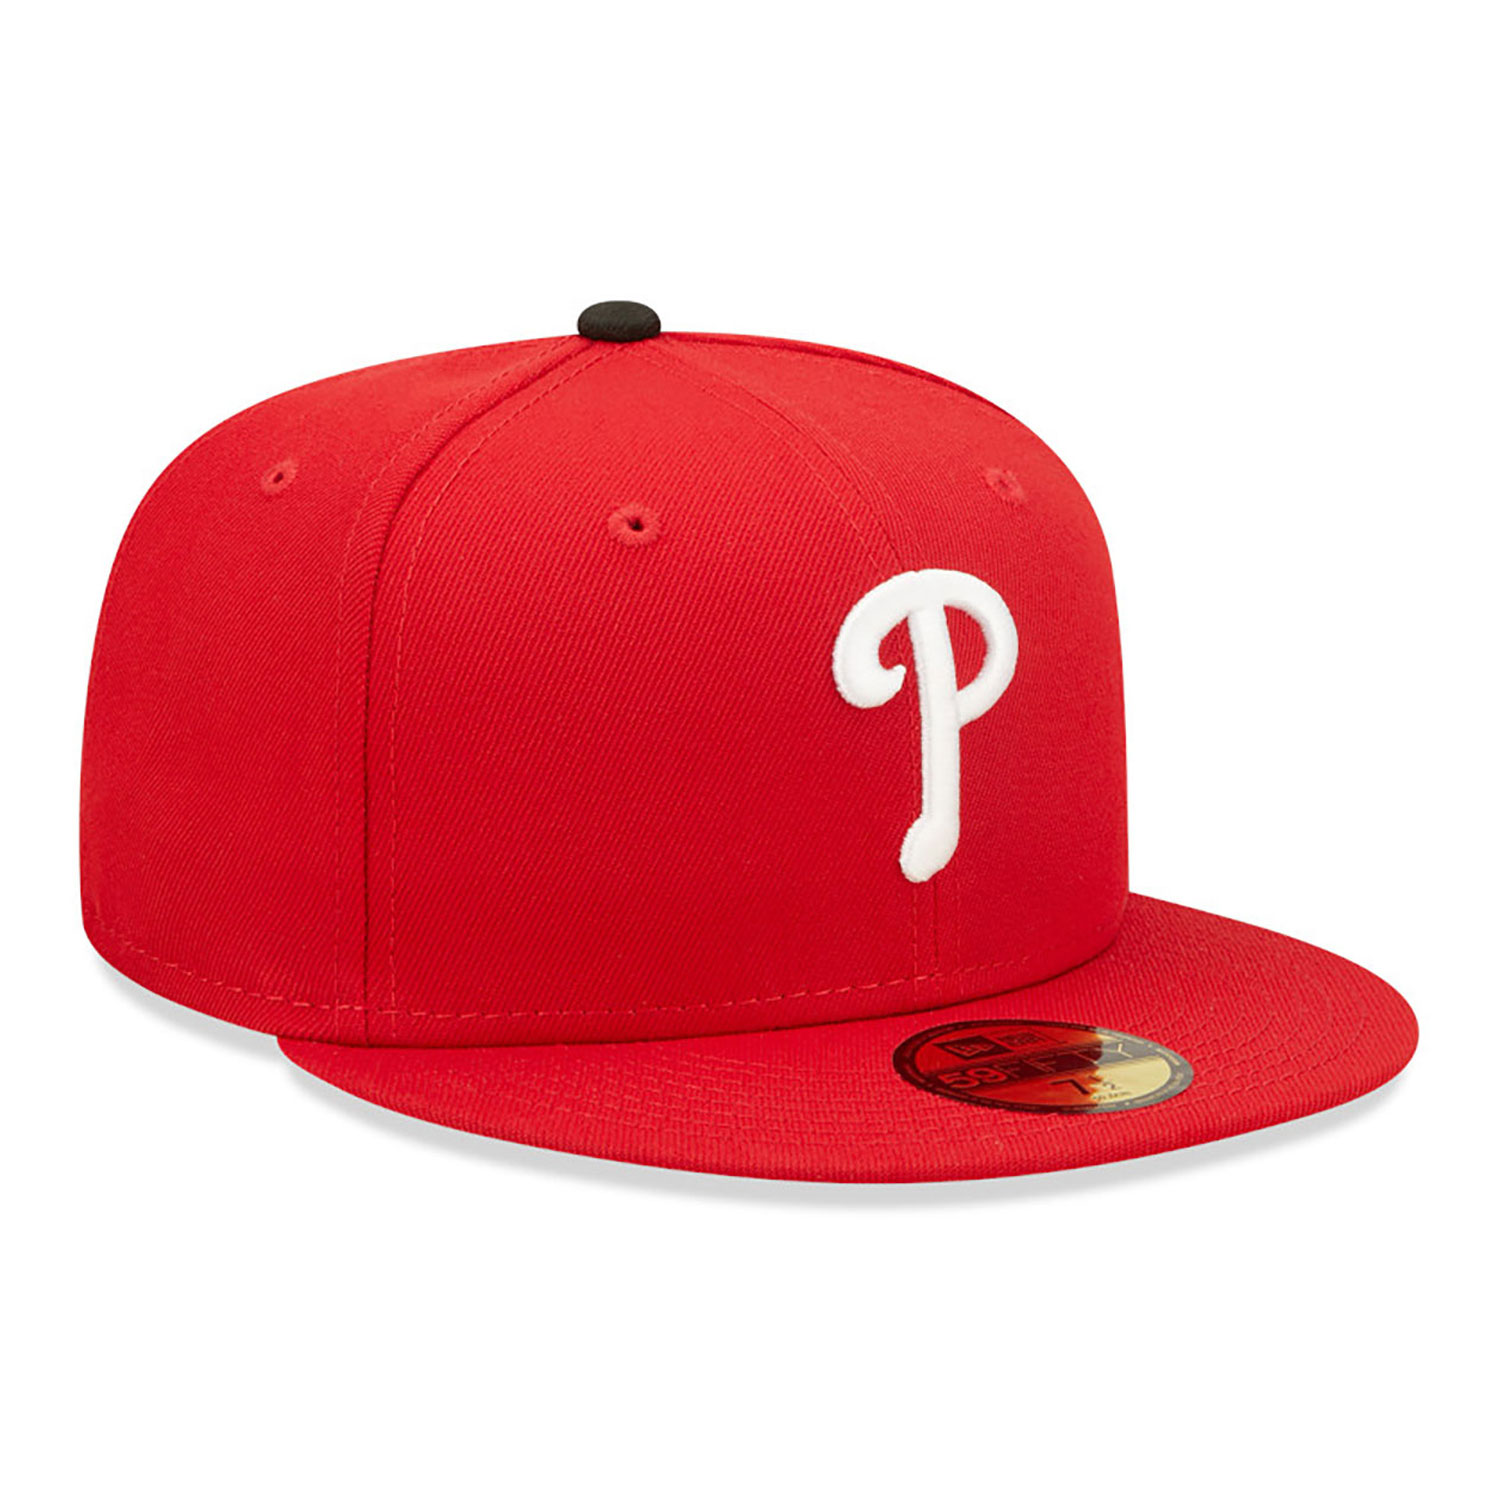 Philadelphia Phillies Authentic On Field Red 59FIFTY Gorra